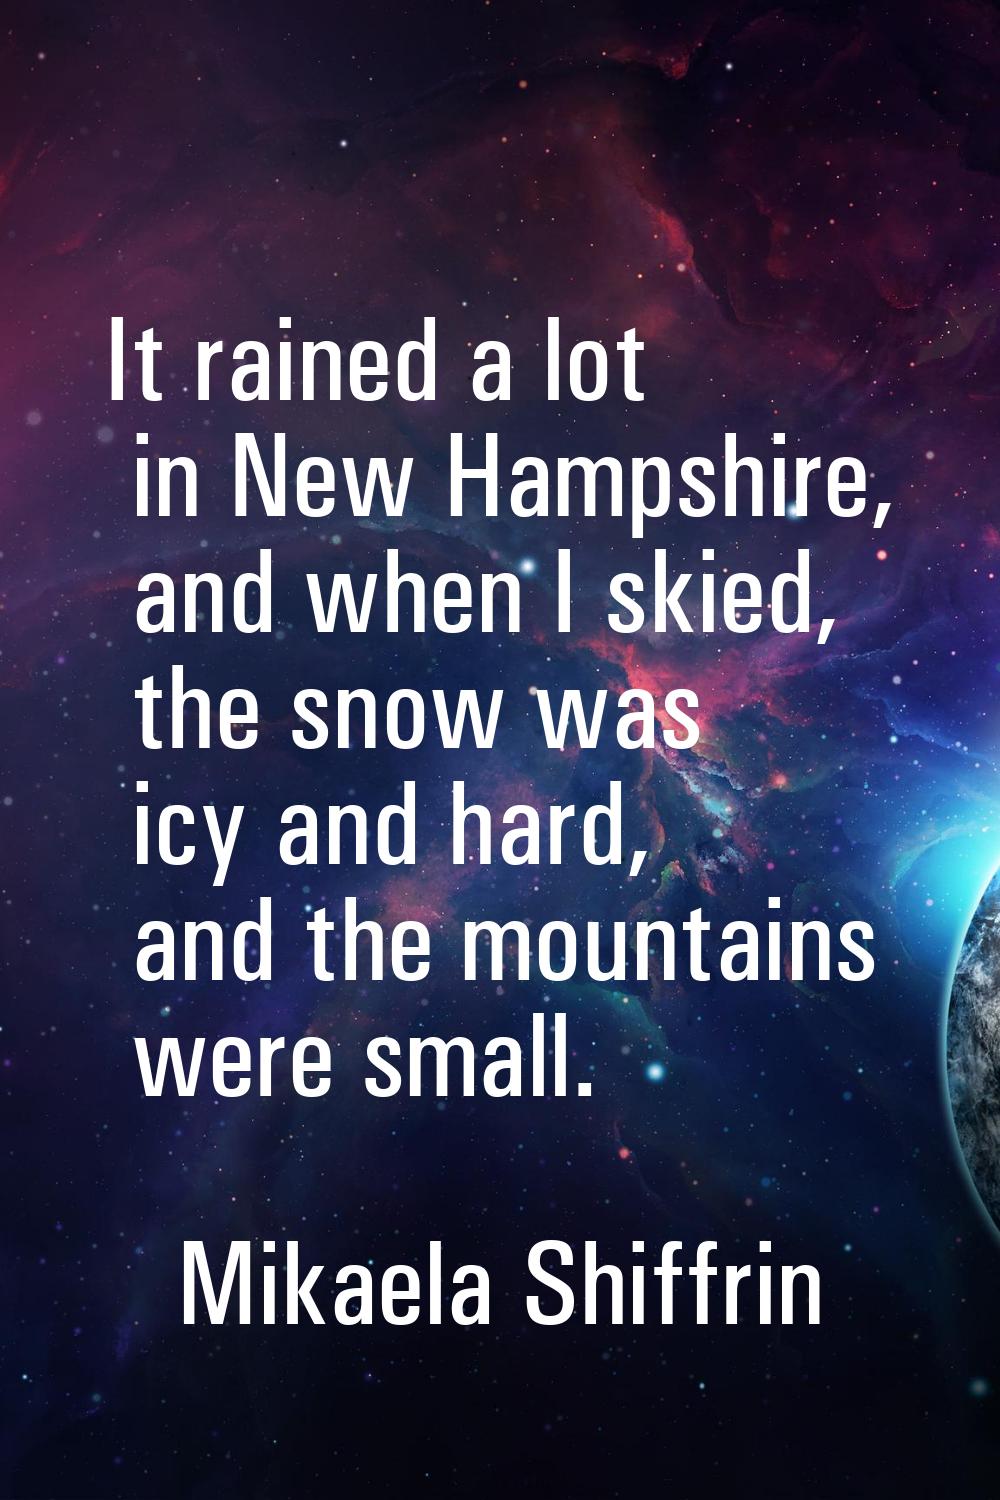 It rained a lot in New Hampshire, and when I skied, the snow was icy and hard, and the mountains we